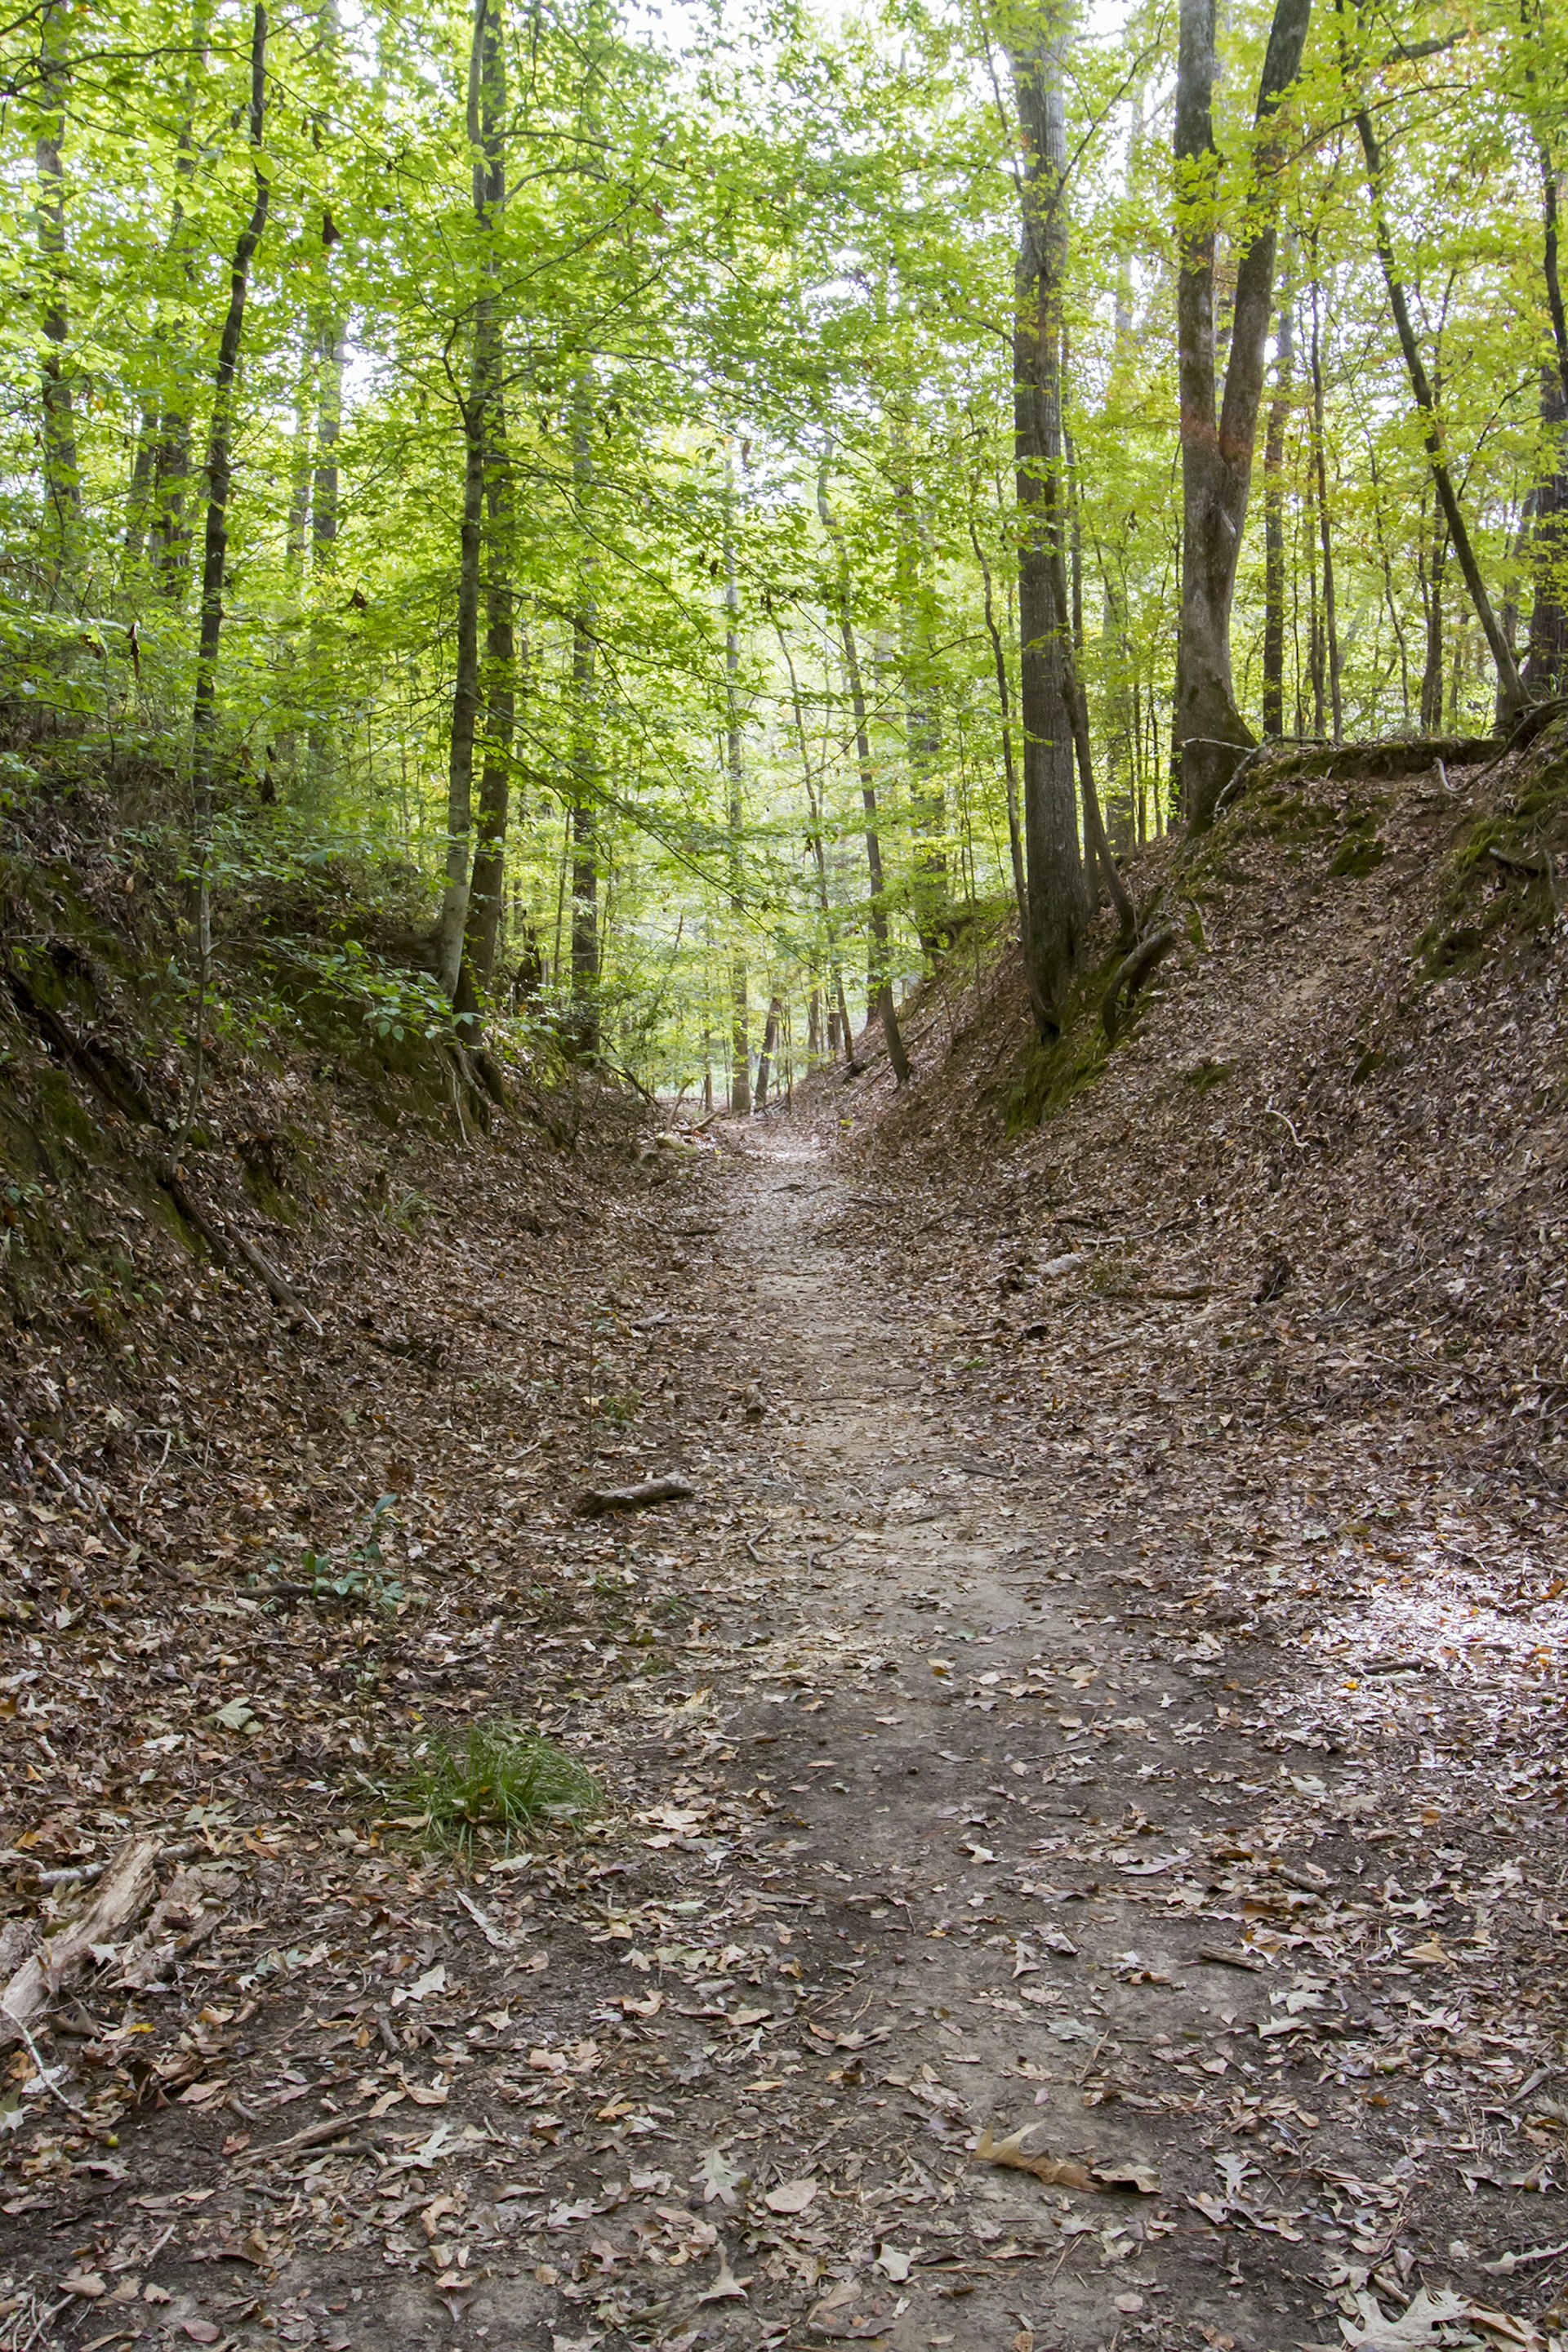 A sunken, dirt footpath with a few scattered leaves winds beneath green trees in spring on the Sunken Trace, part of the Natchez Trace